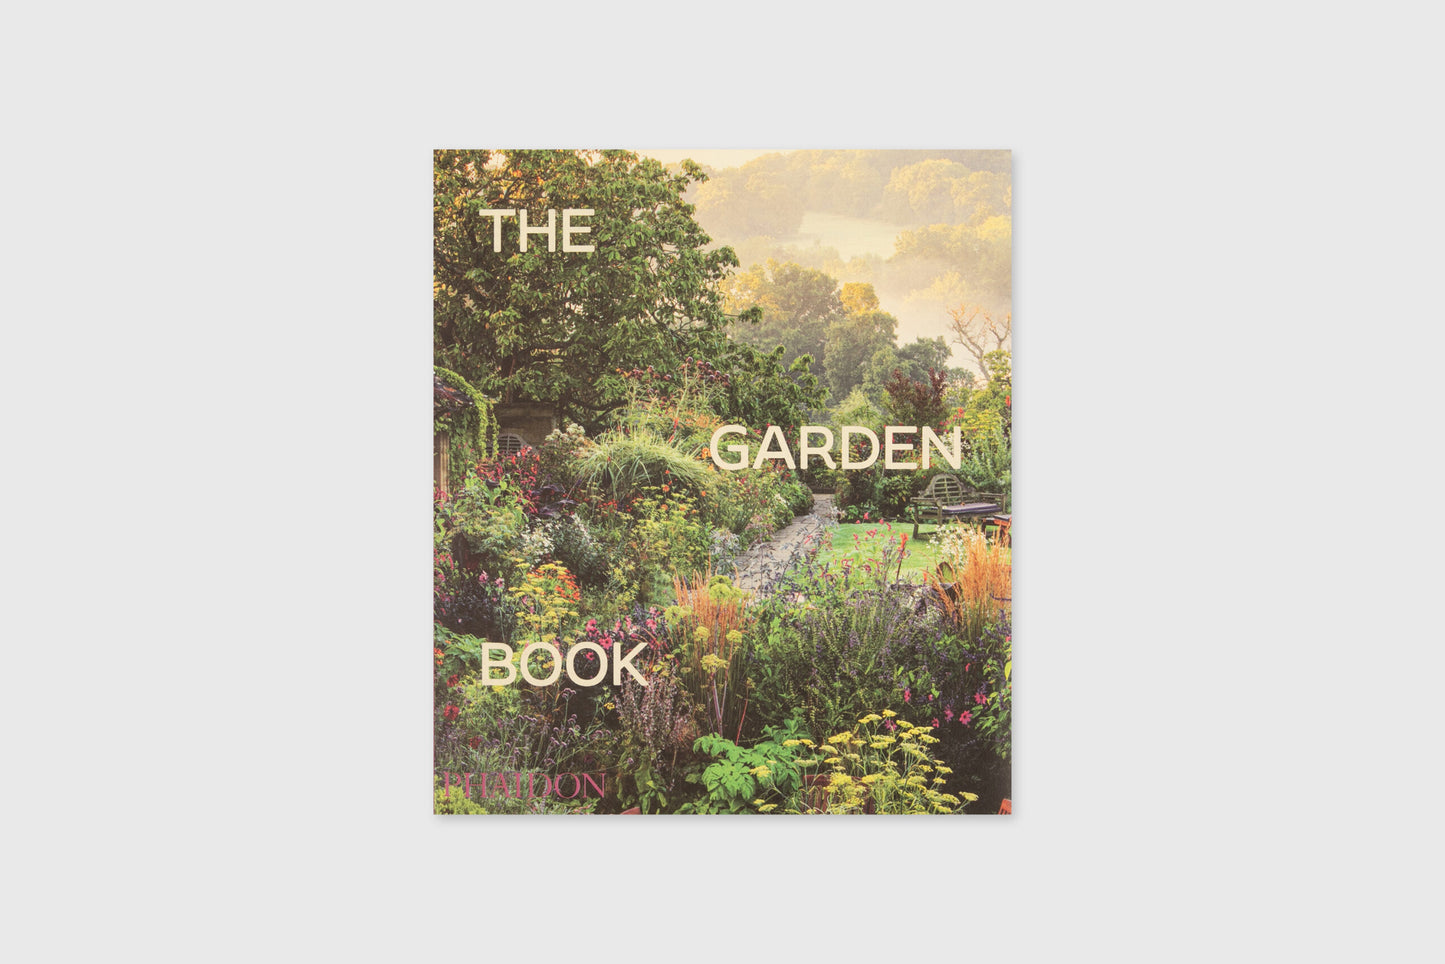 The Garden Book, Revised and updated edition